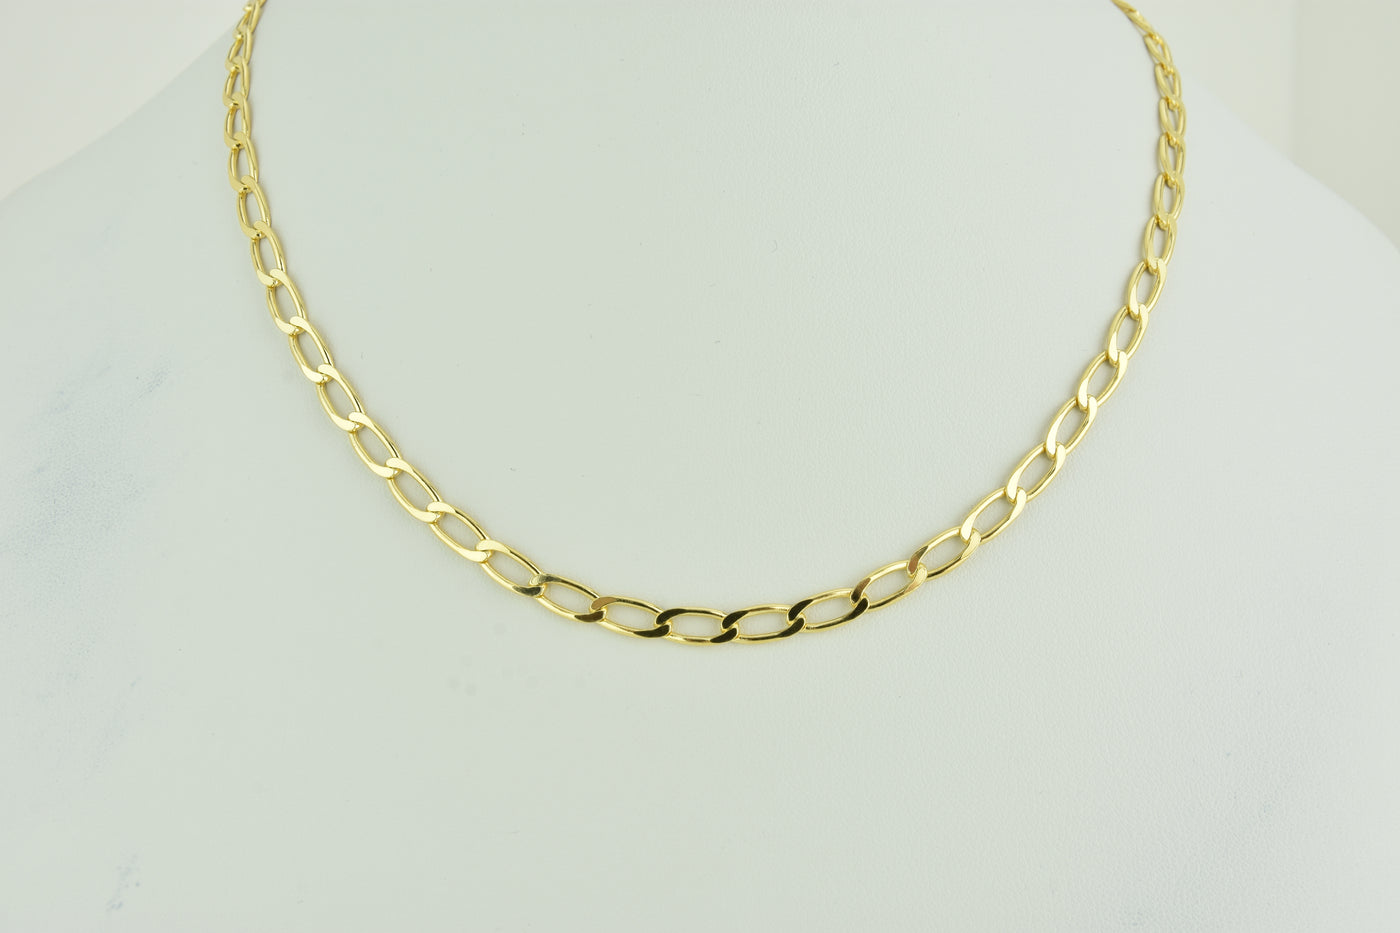 Open Link Sterling Silver Chain with Yellow Gold plate